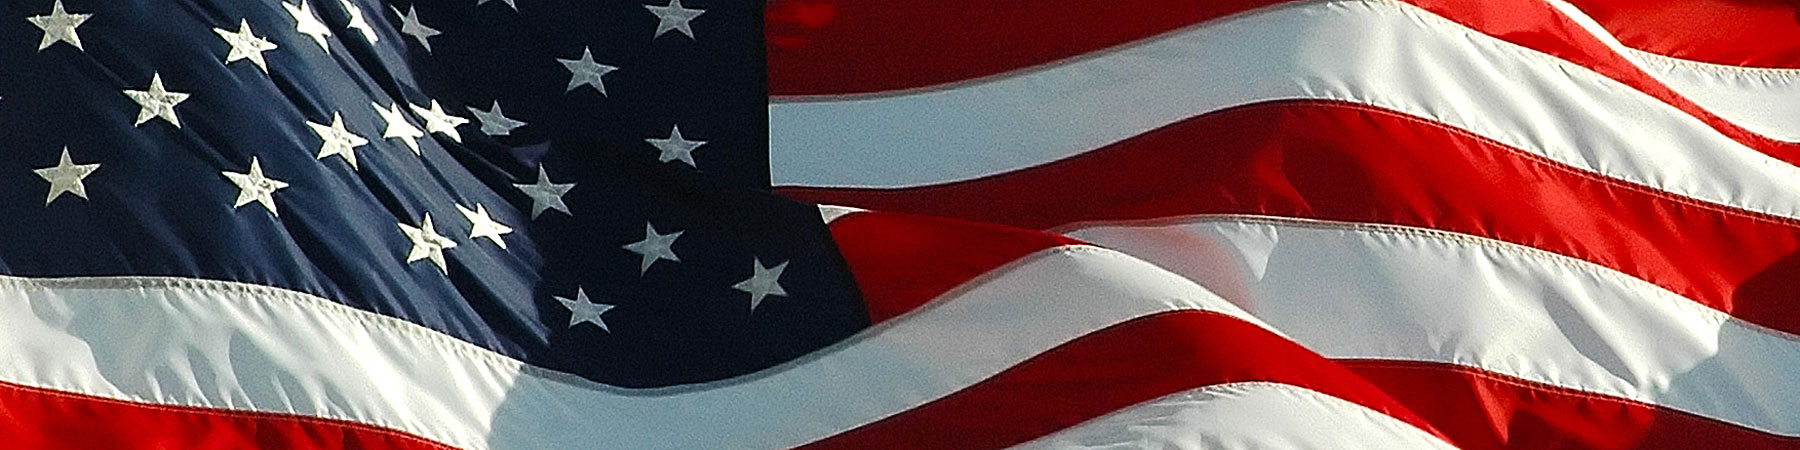 A close up of an American flag waving